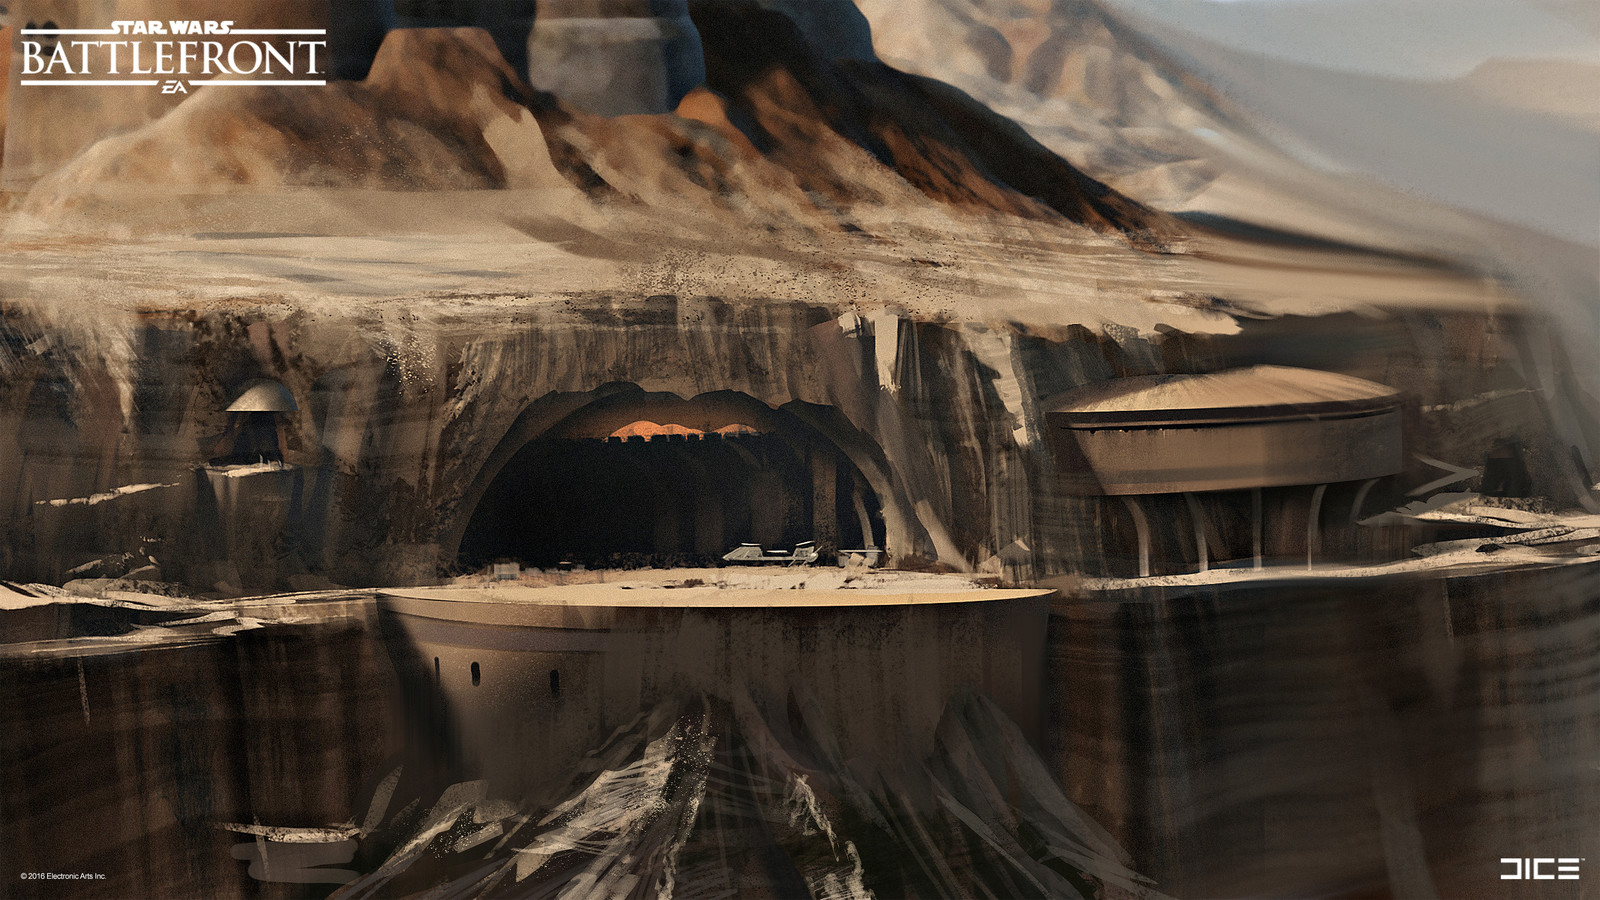 Jabba's Palace Concept Art  for the Star Wars Battlefront Outer Rim DLC. (2015)